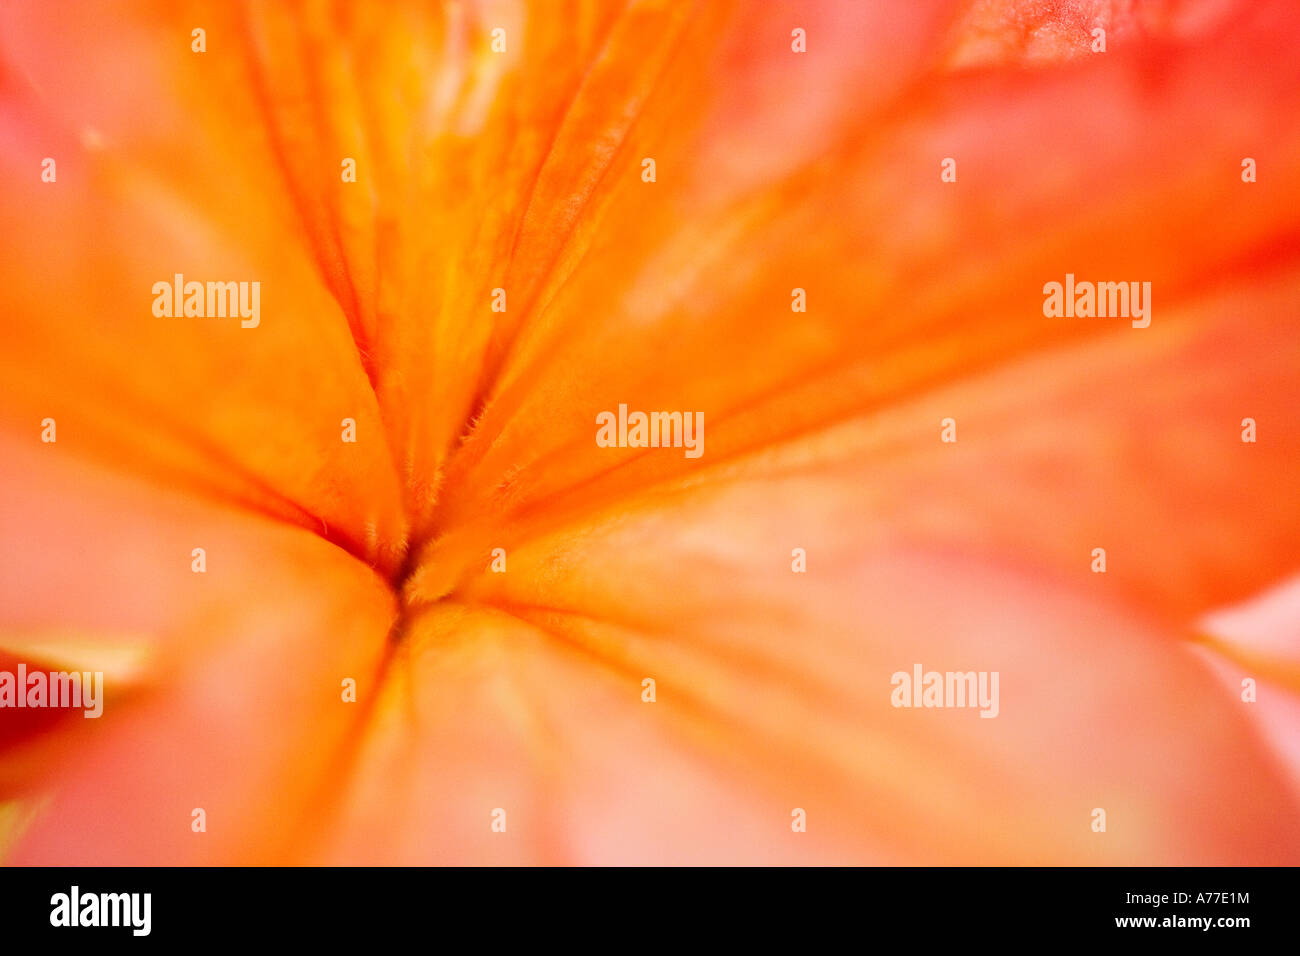 abstract close-up image of the centre of an orange rhododendron flower Stock Photo